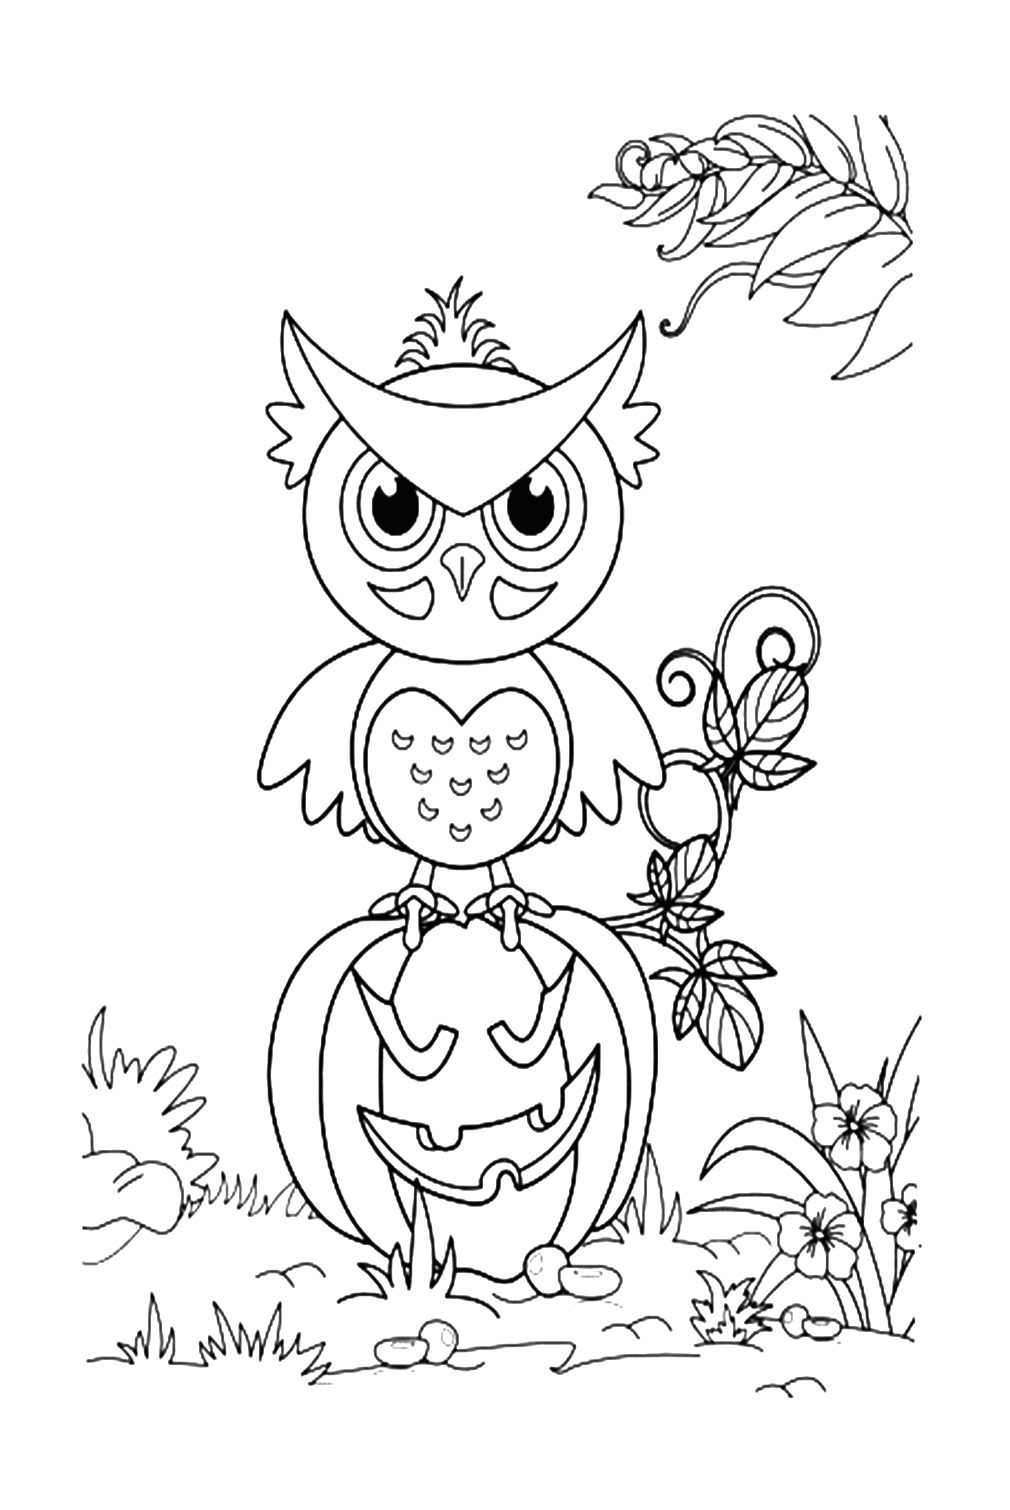 Owl Coloring Sheet from Owl